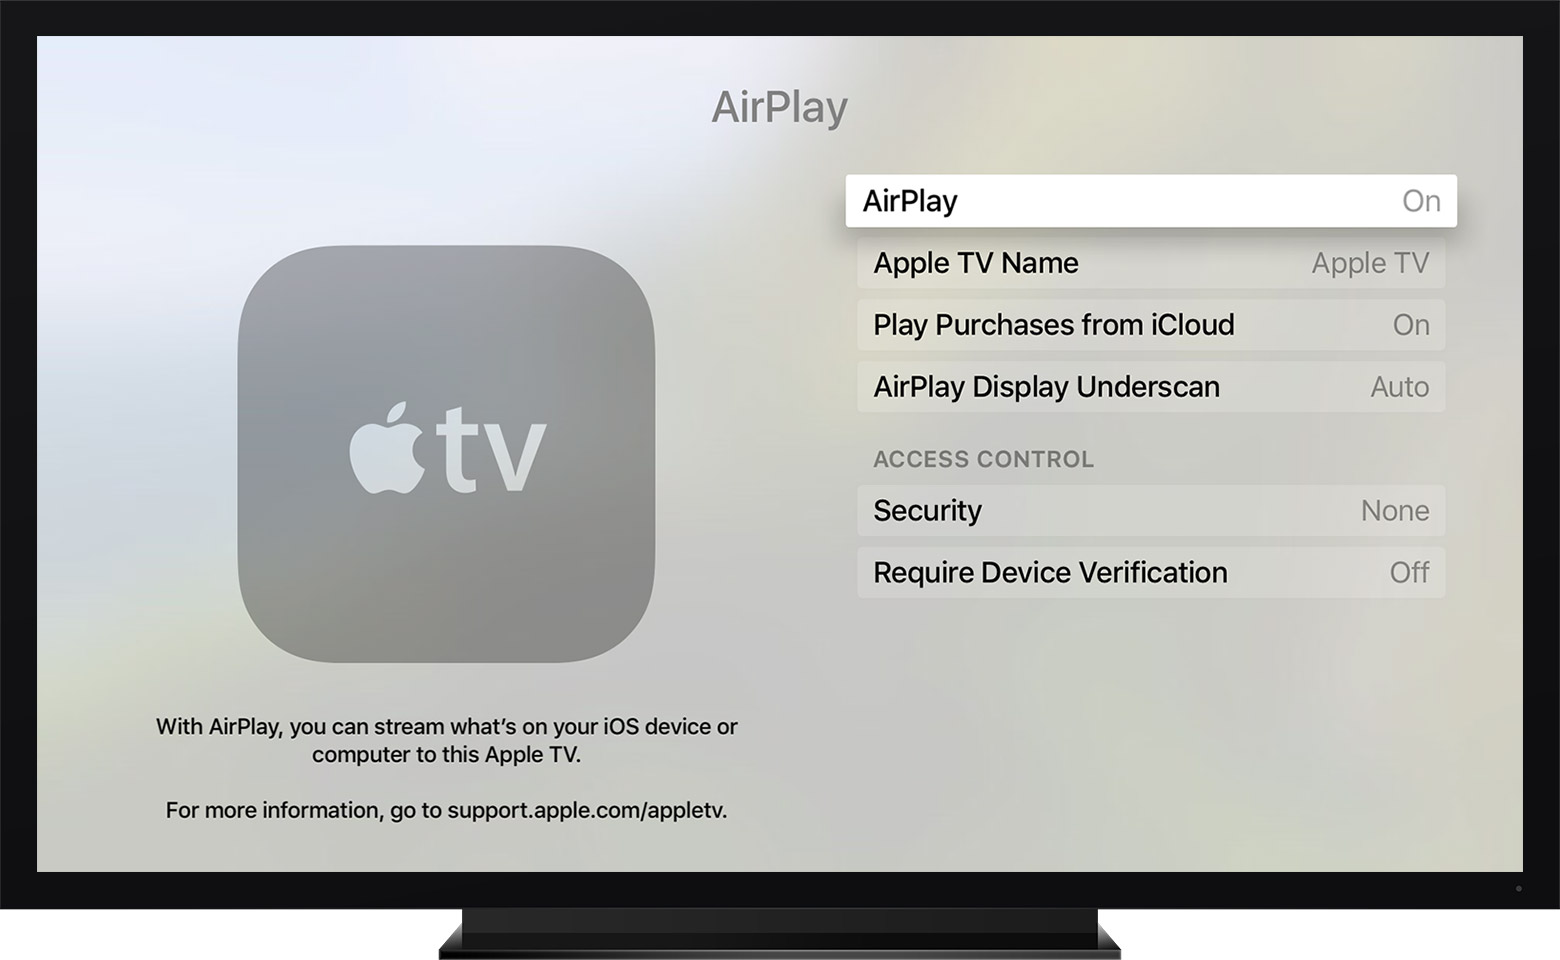 airplay on pc to apple tv